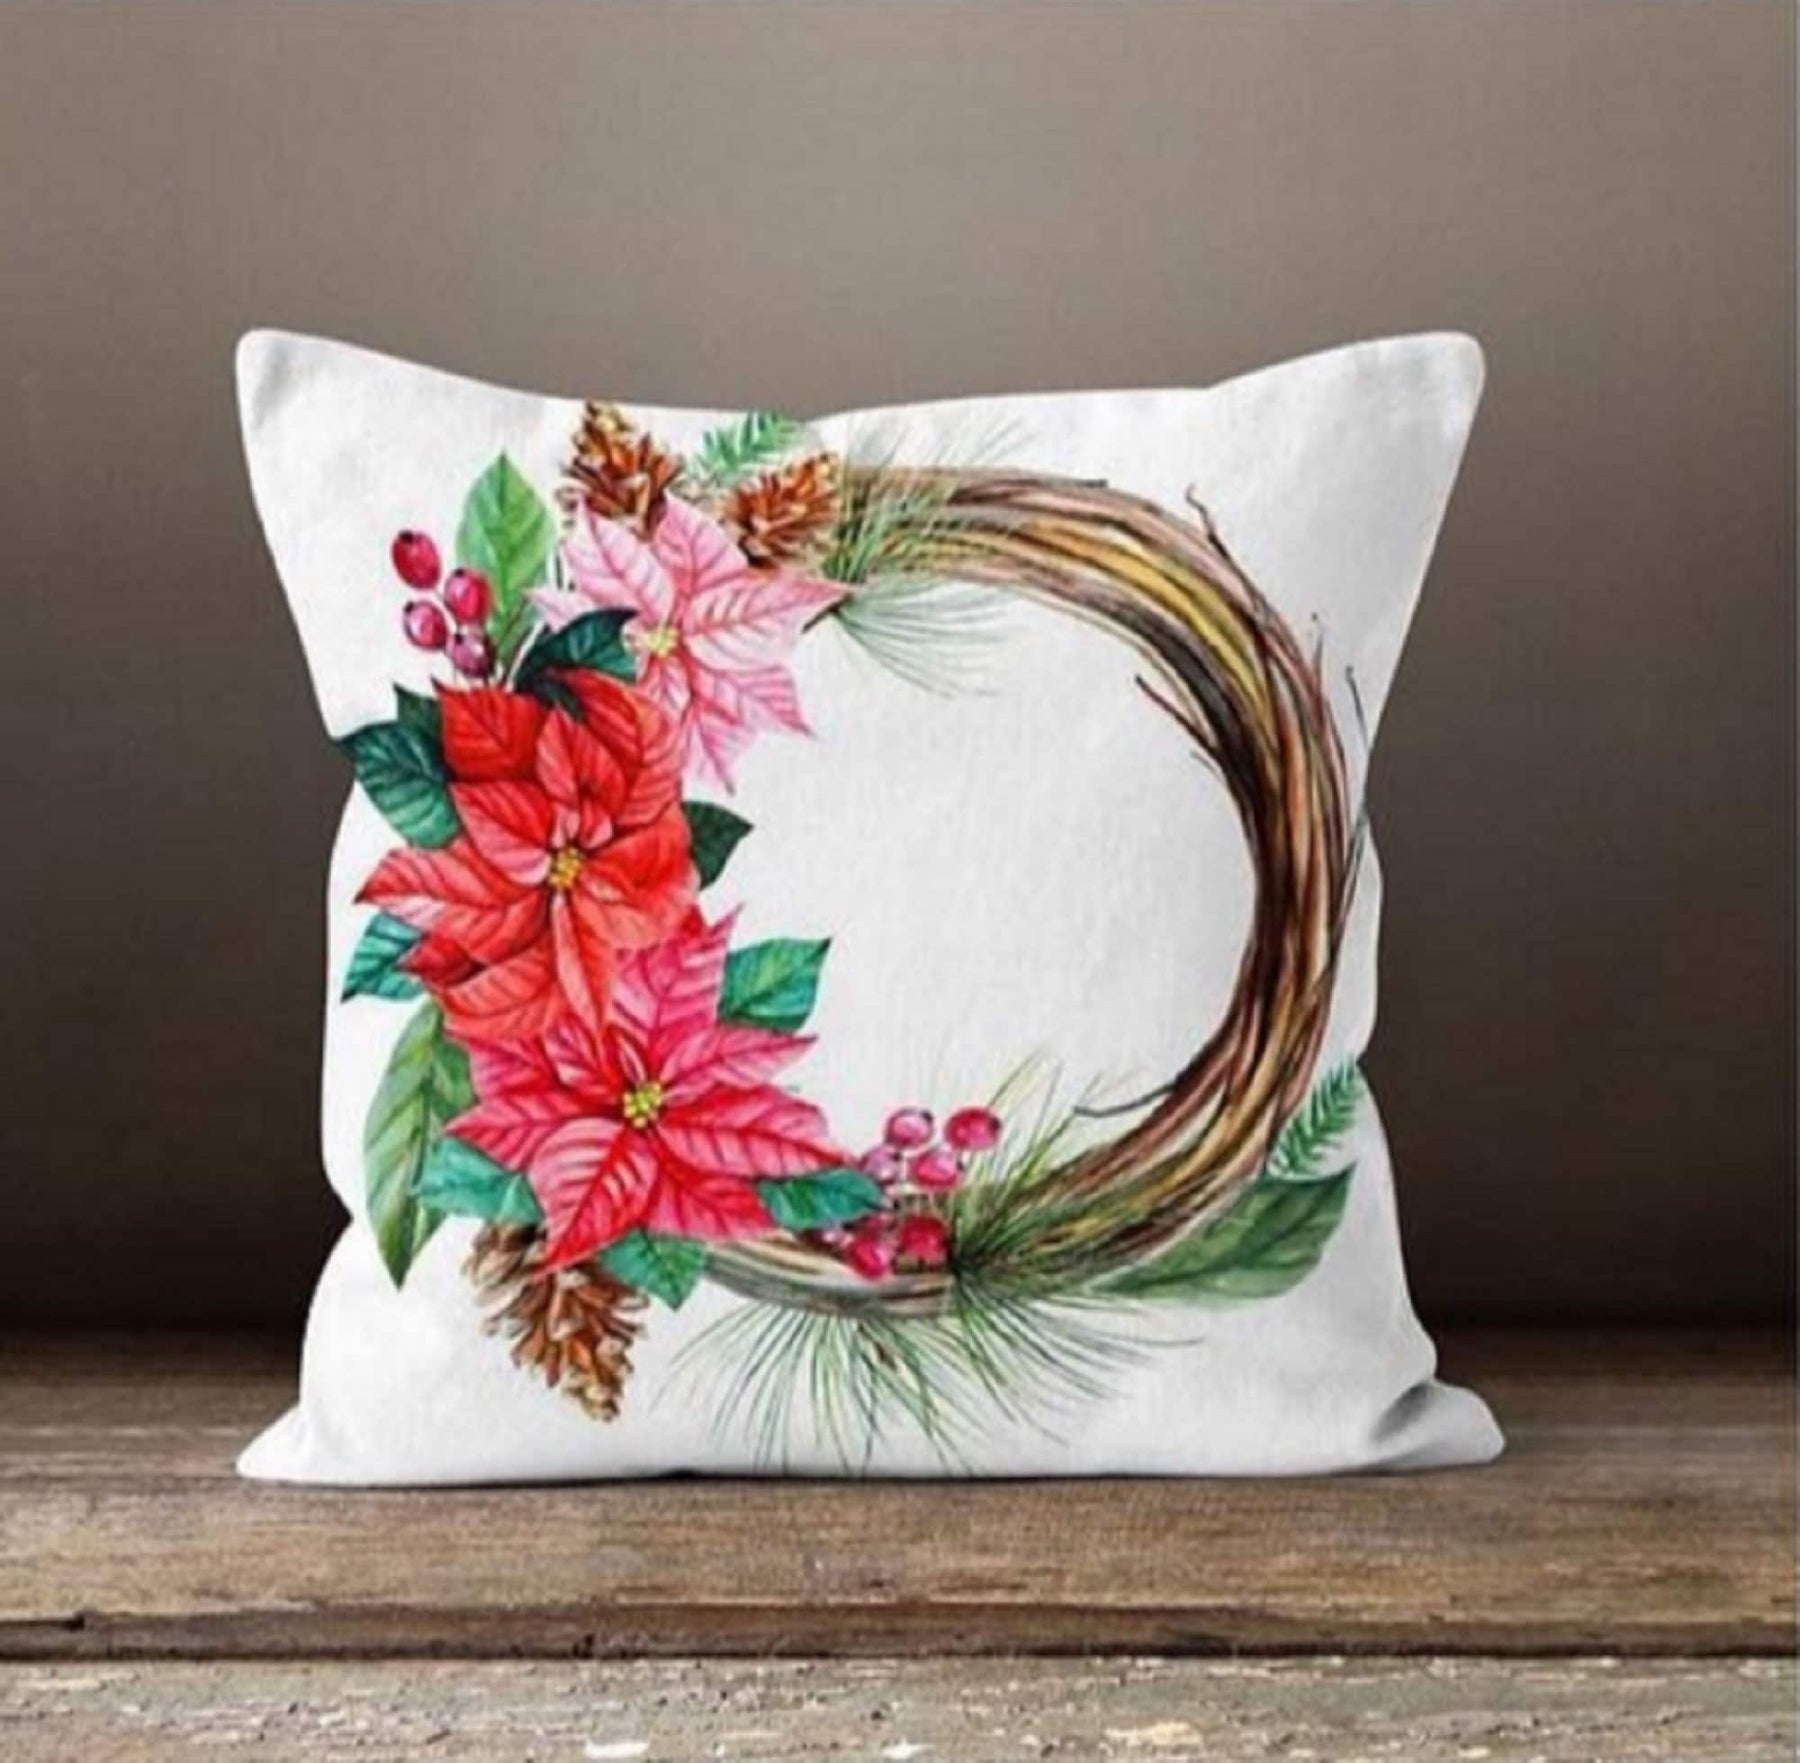 Red Felt Poinsettia Shaped Holiday Decorative Throw Pillow